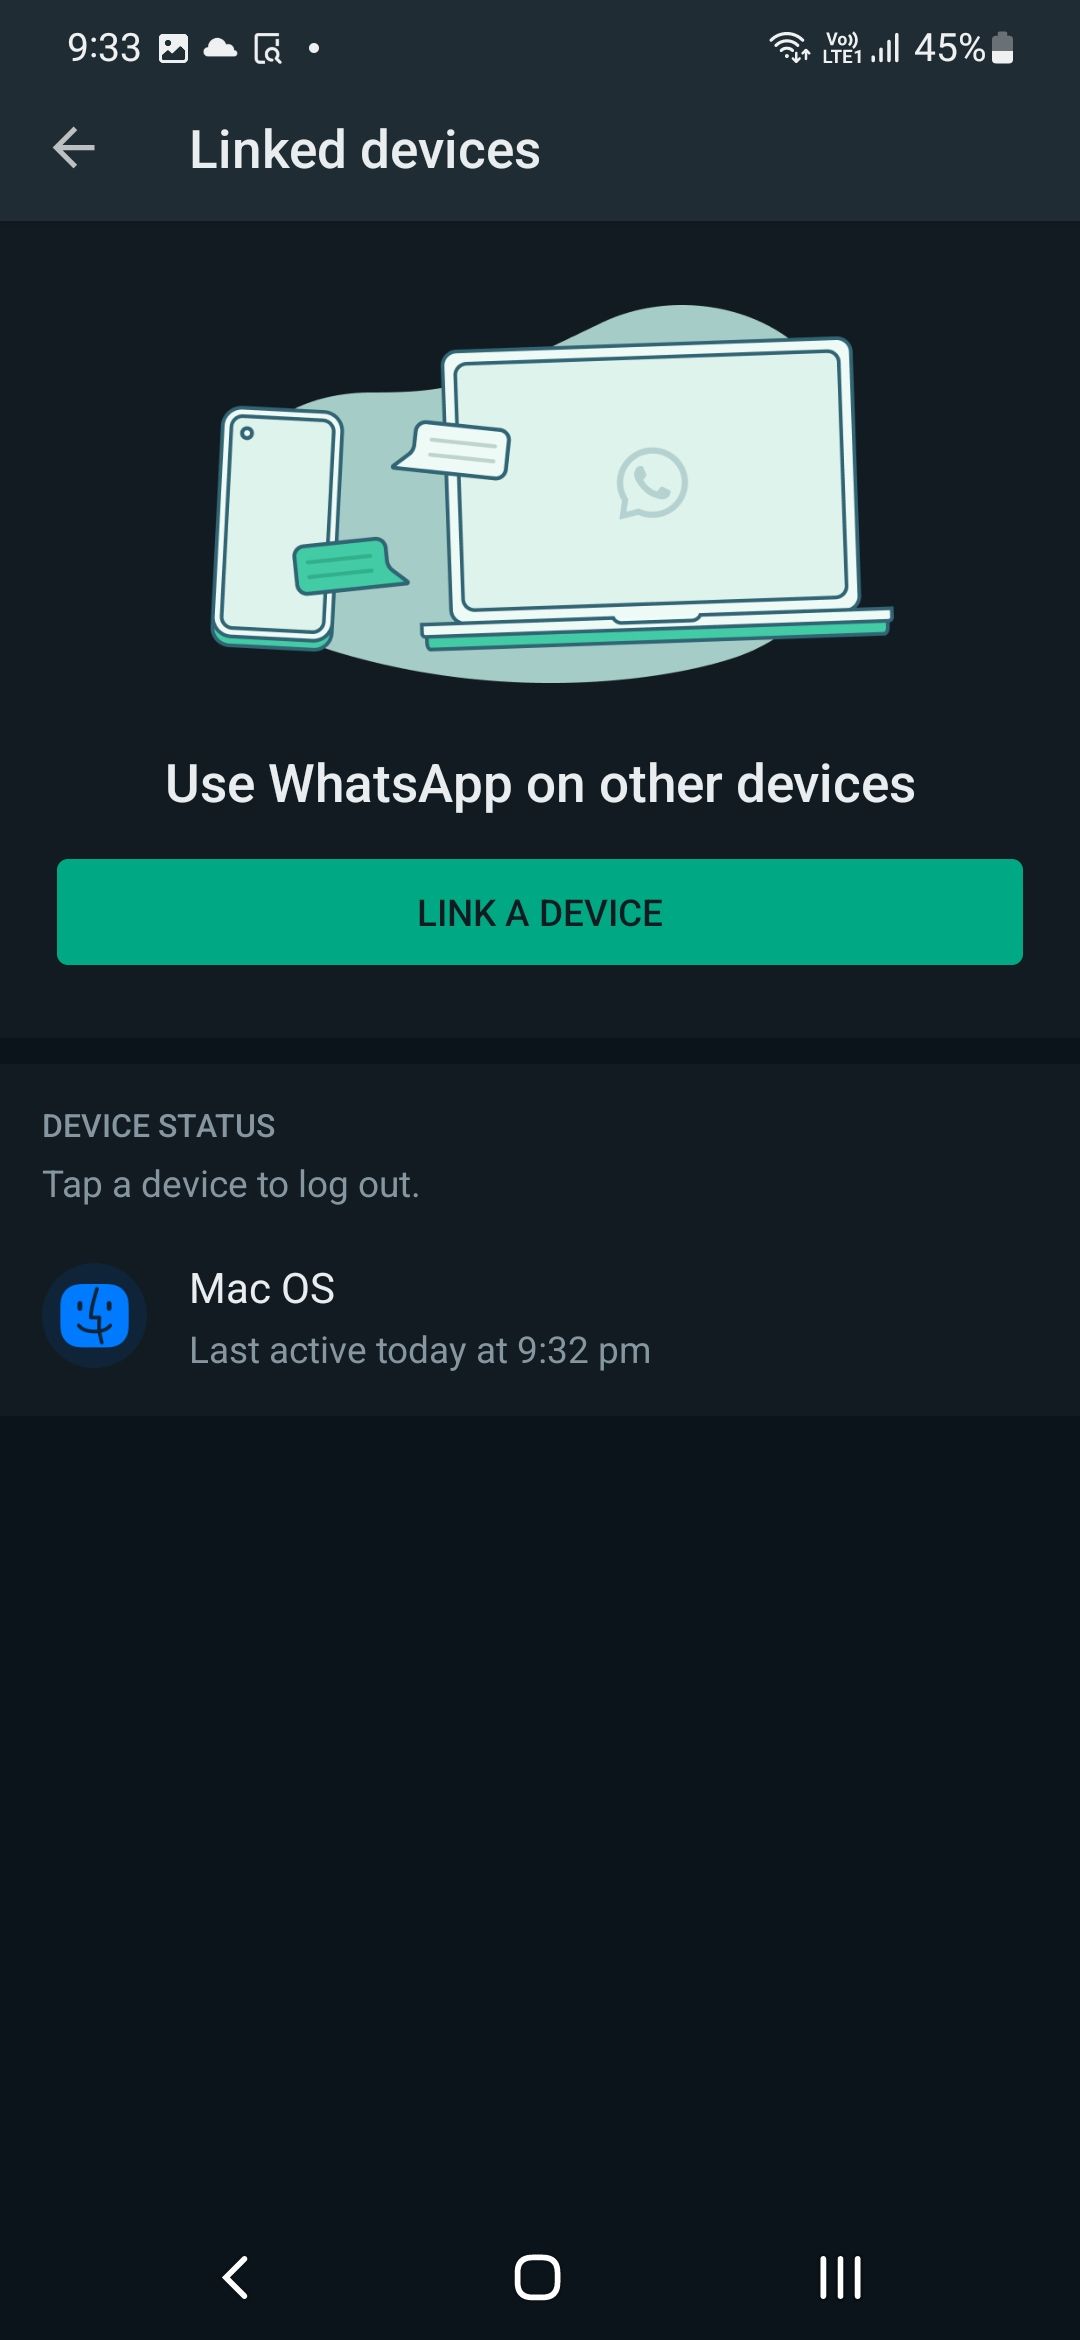 Linked devices in WhatsApp Android